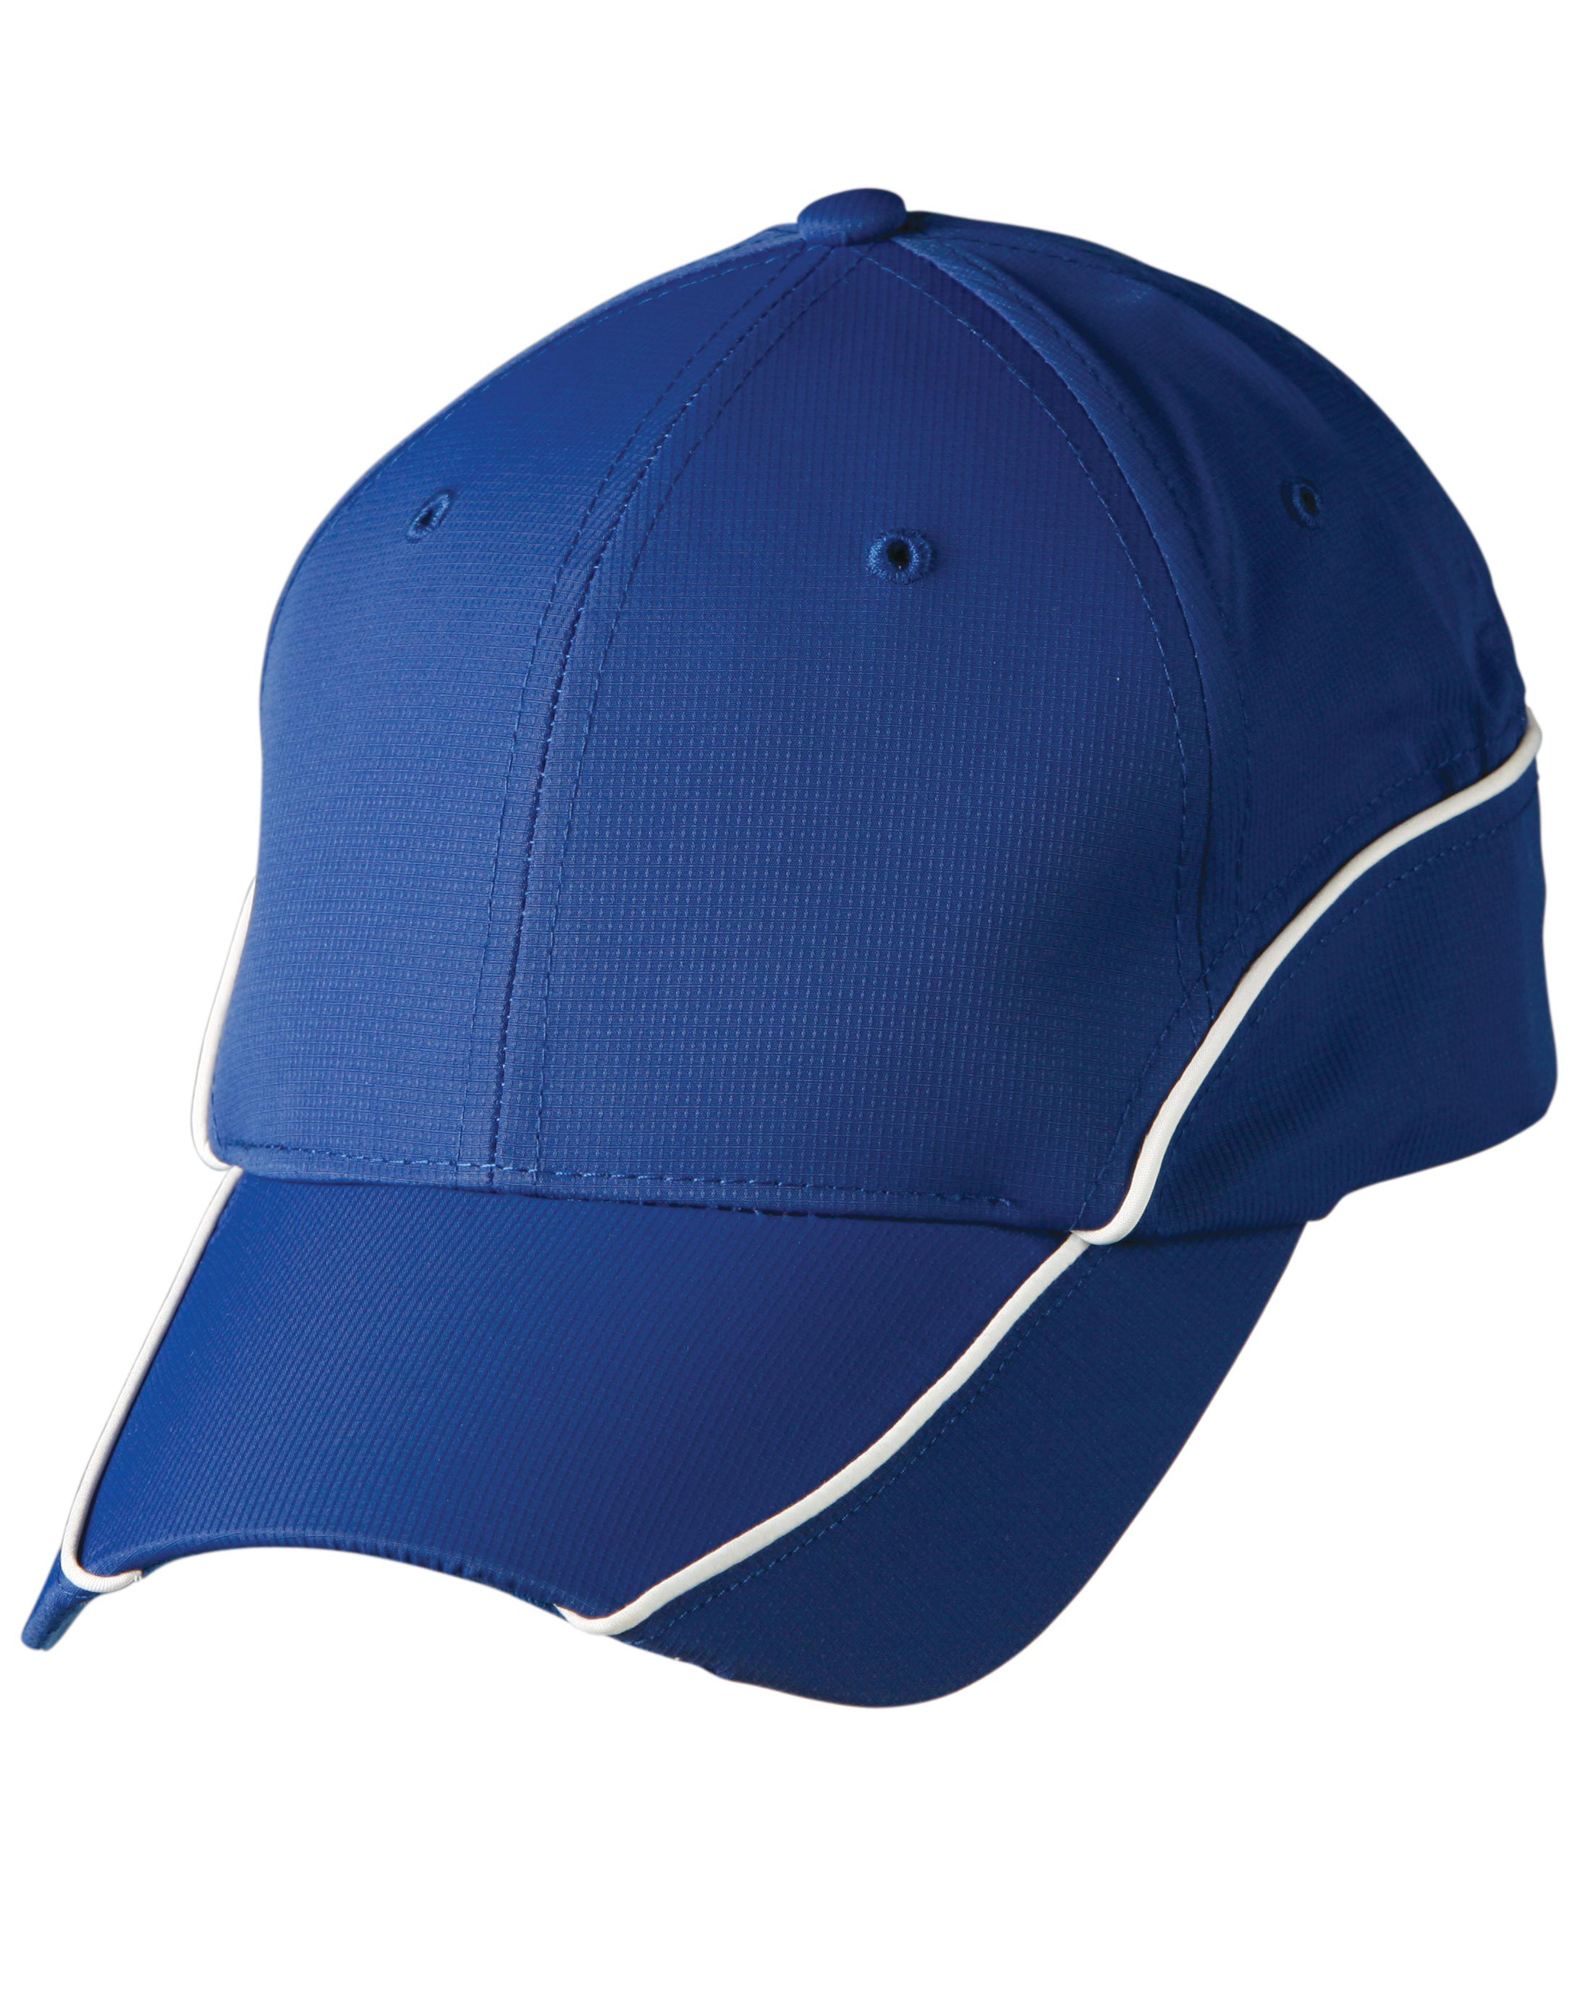 WinningSpirit CH21-Nylon ripstop structured cap with polyester m